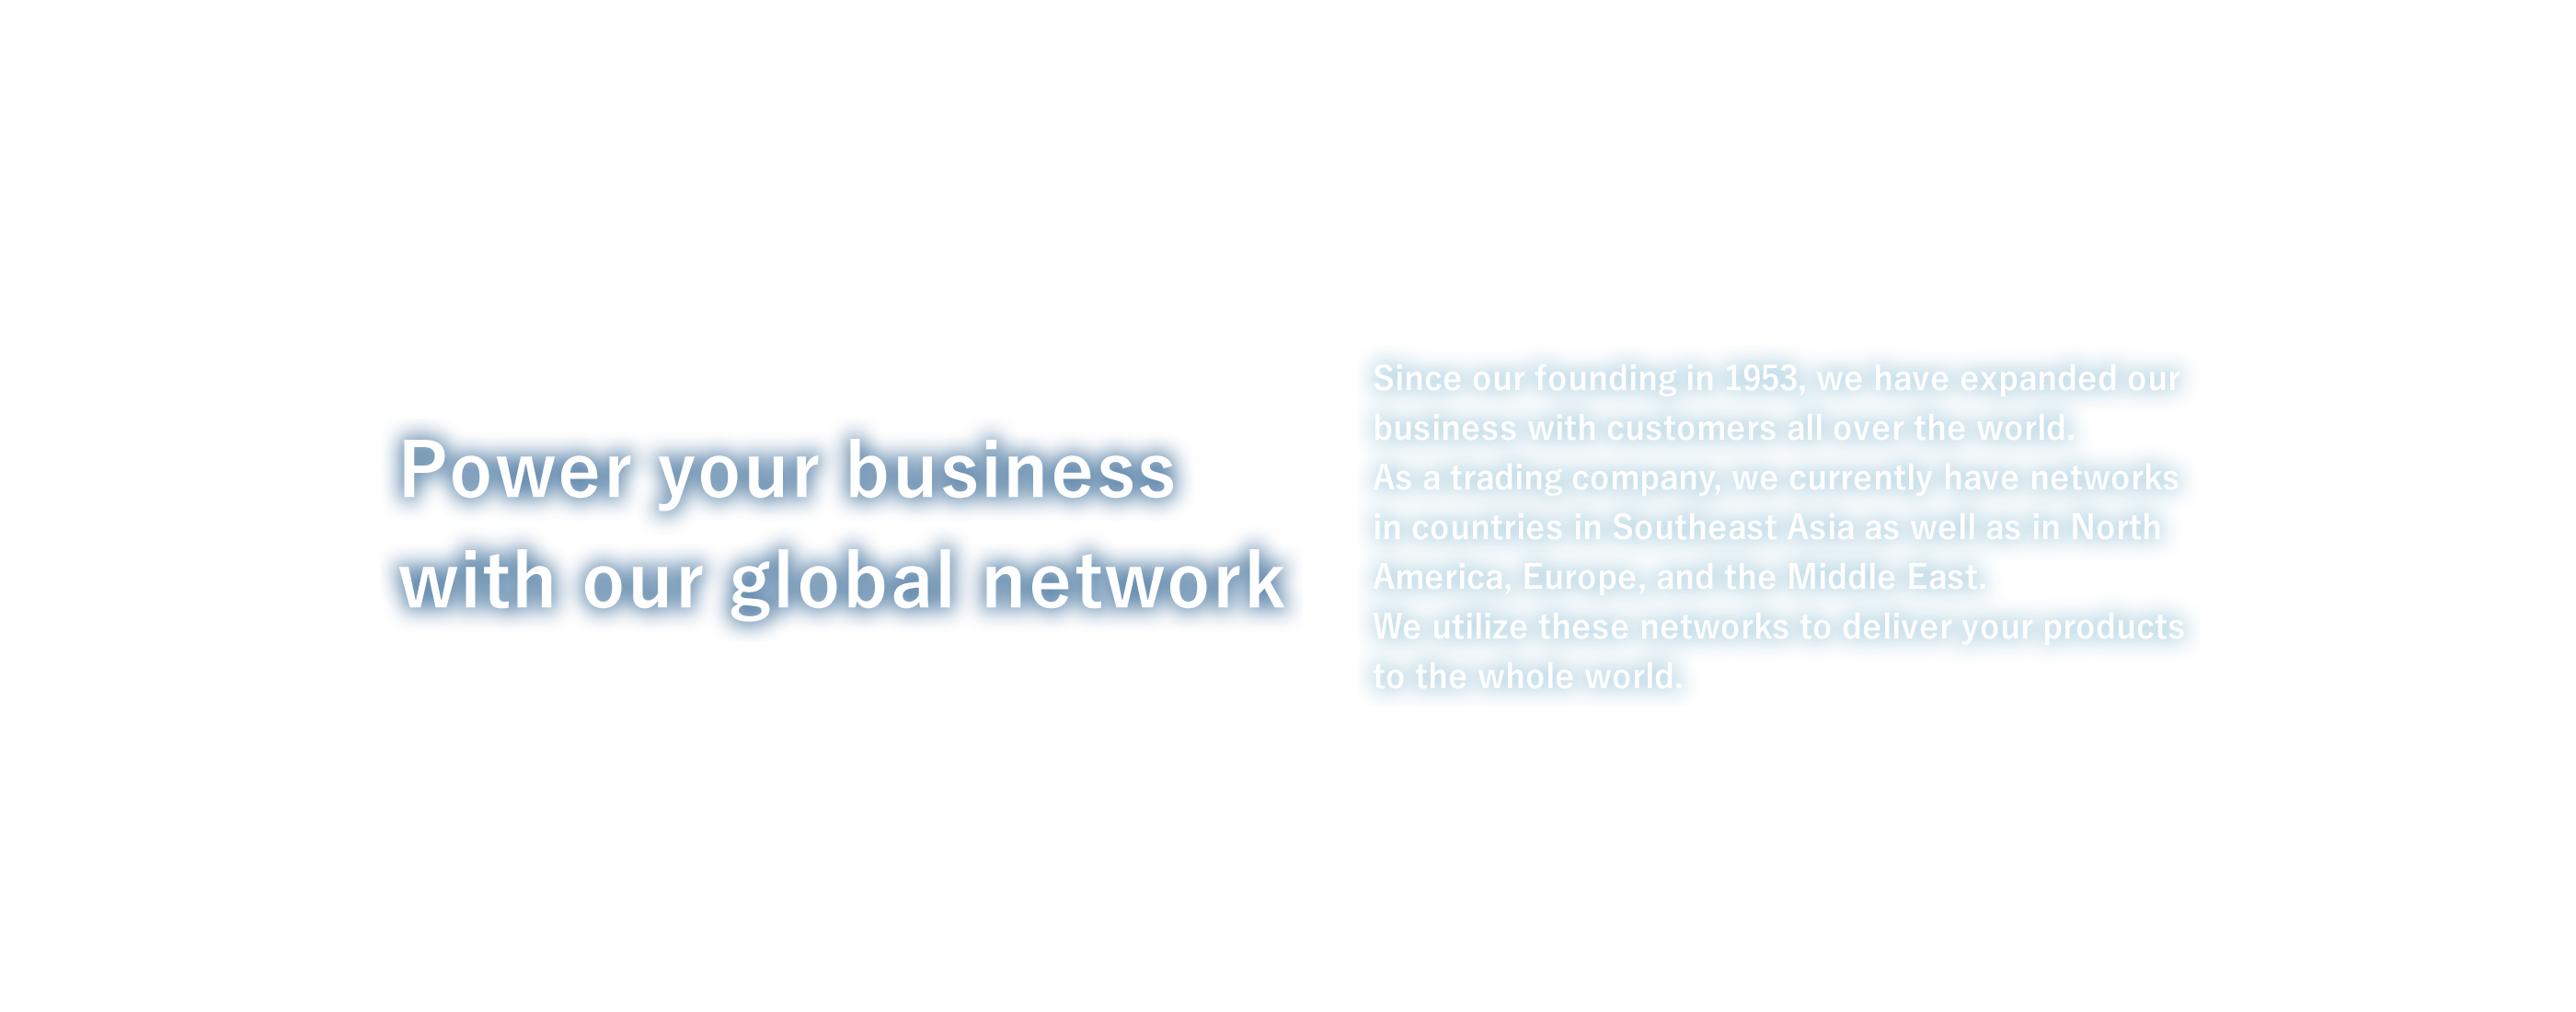 Power your business with our global network